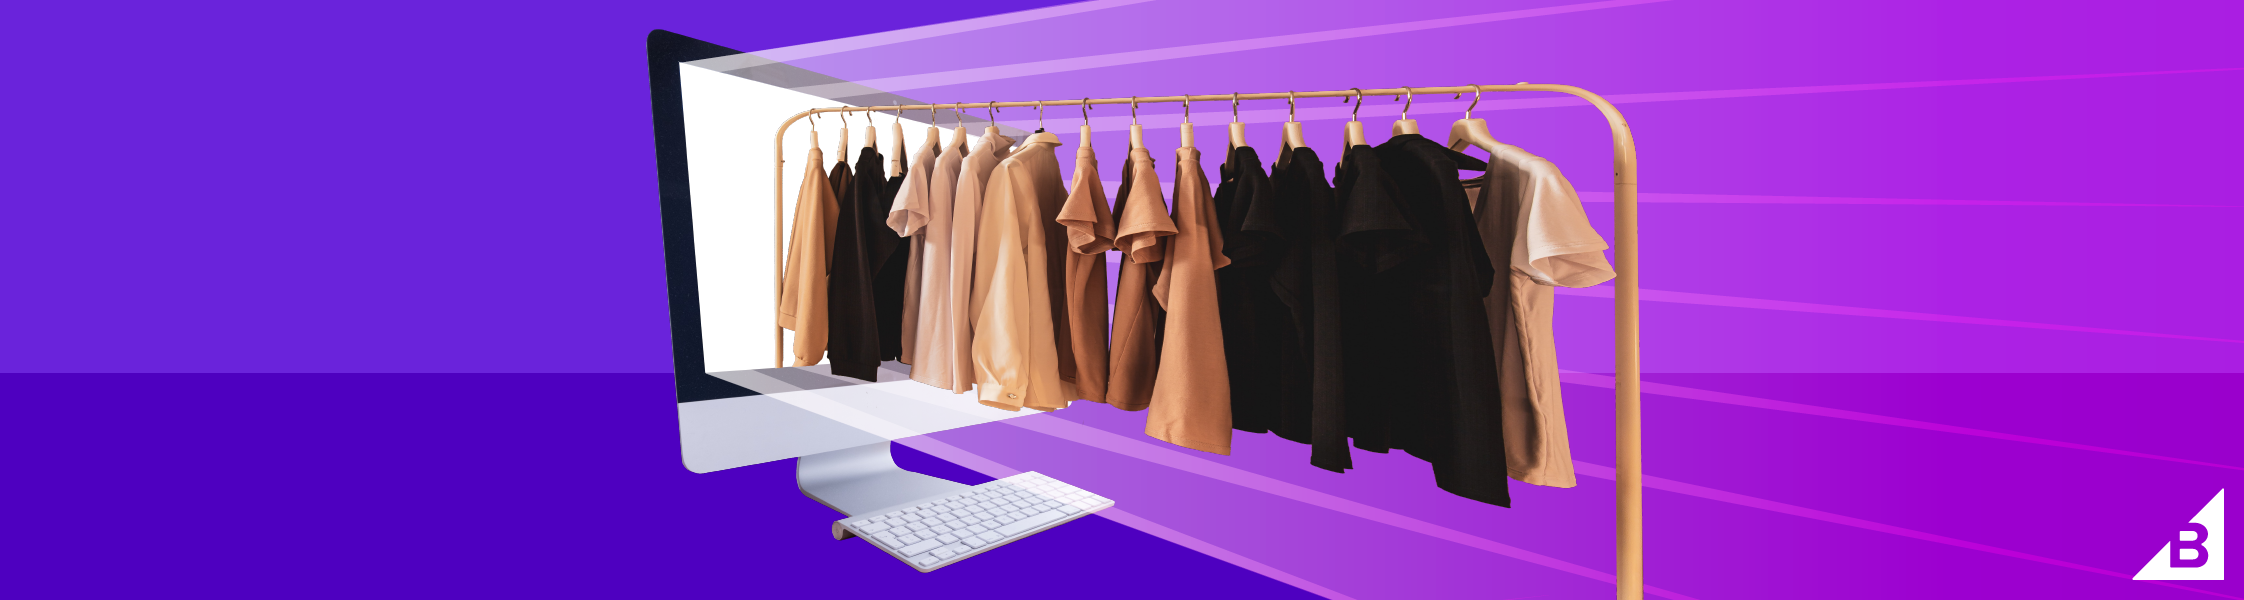 How To Start An Online Clothing Business From Home